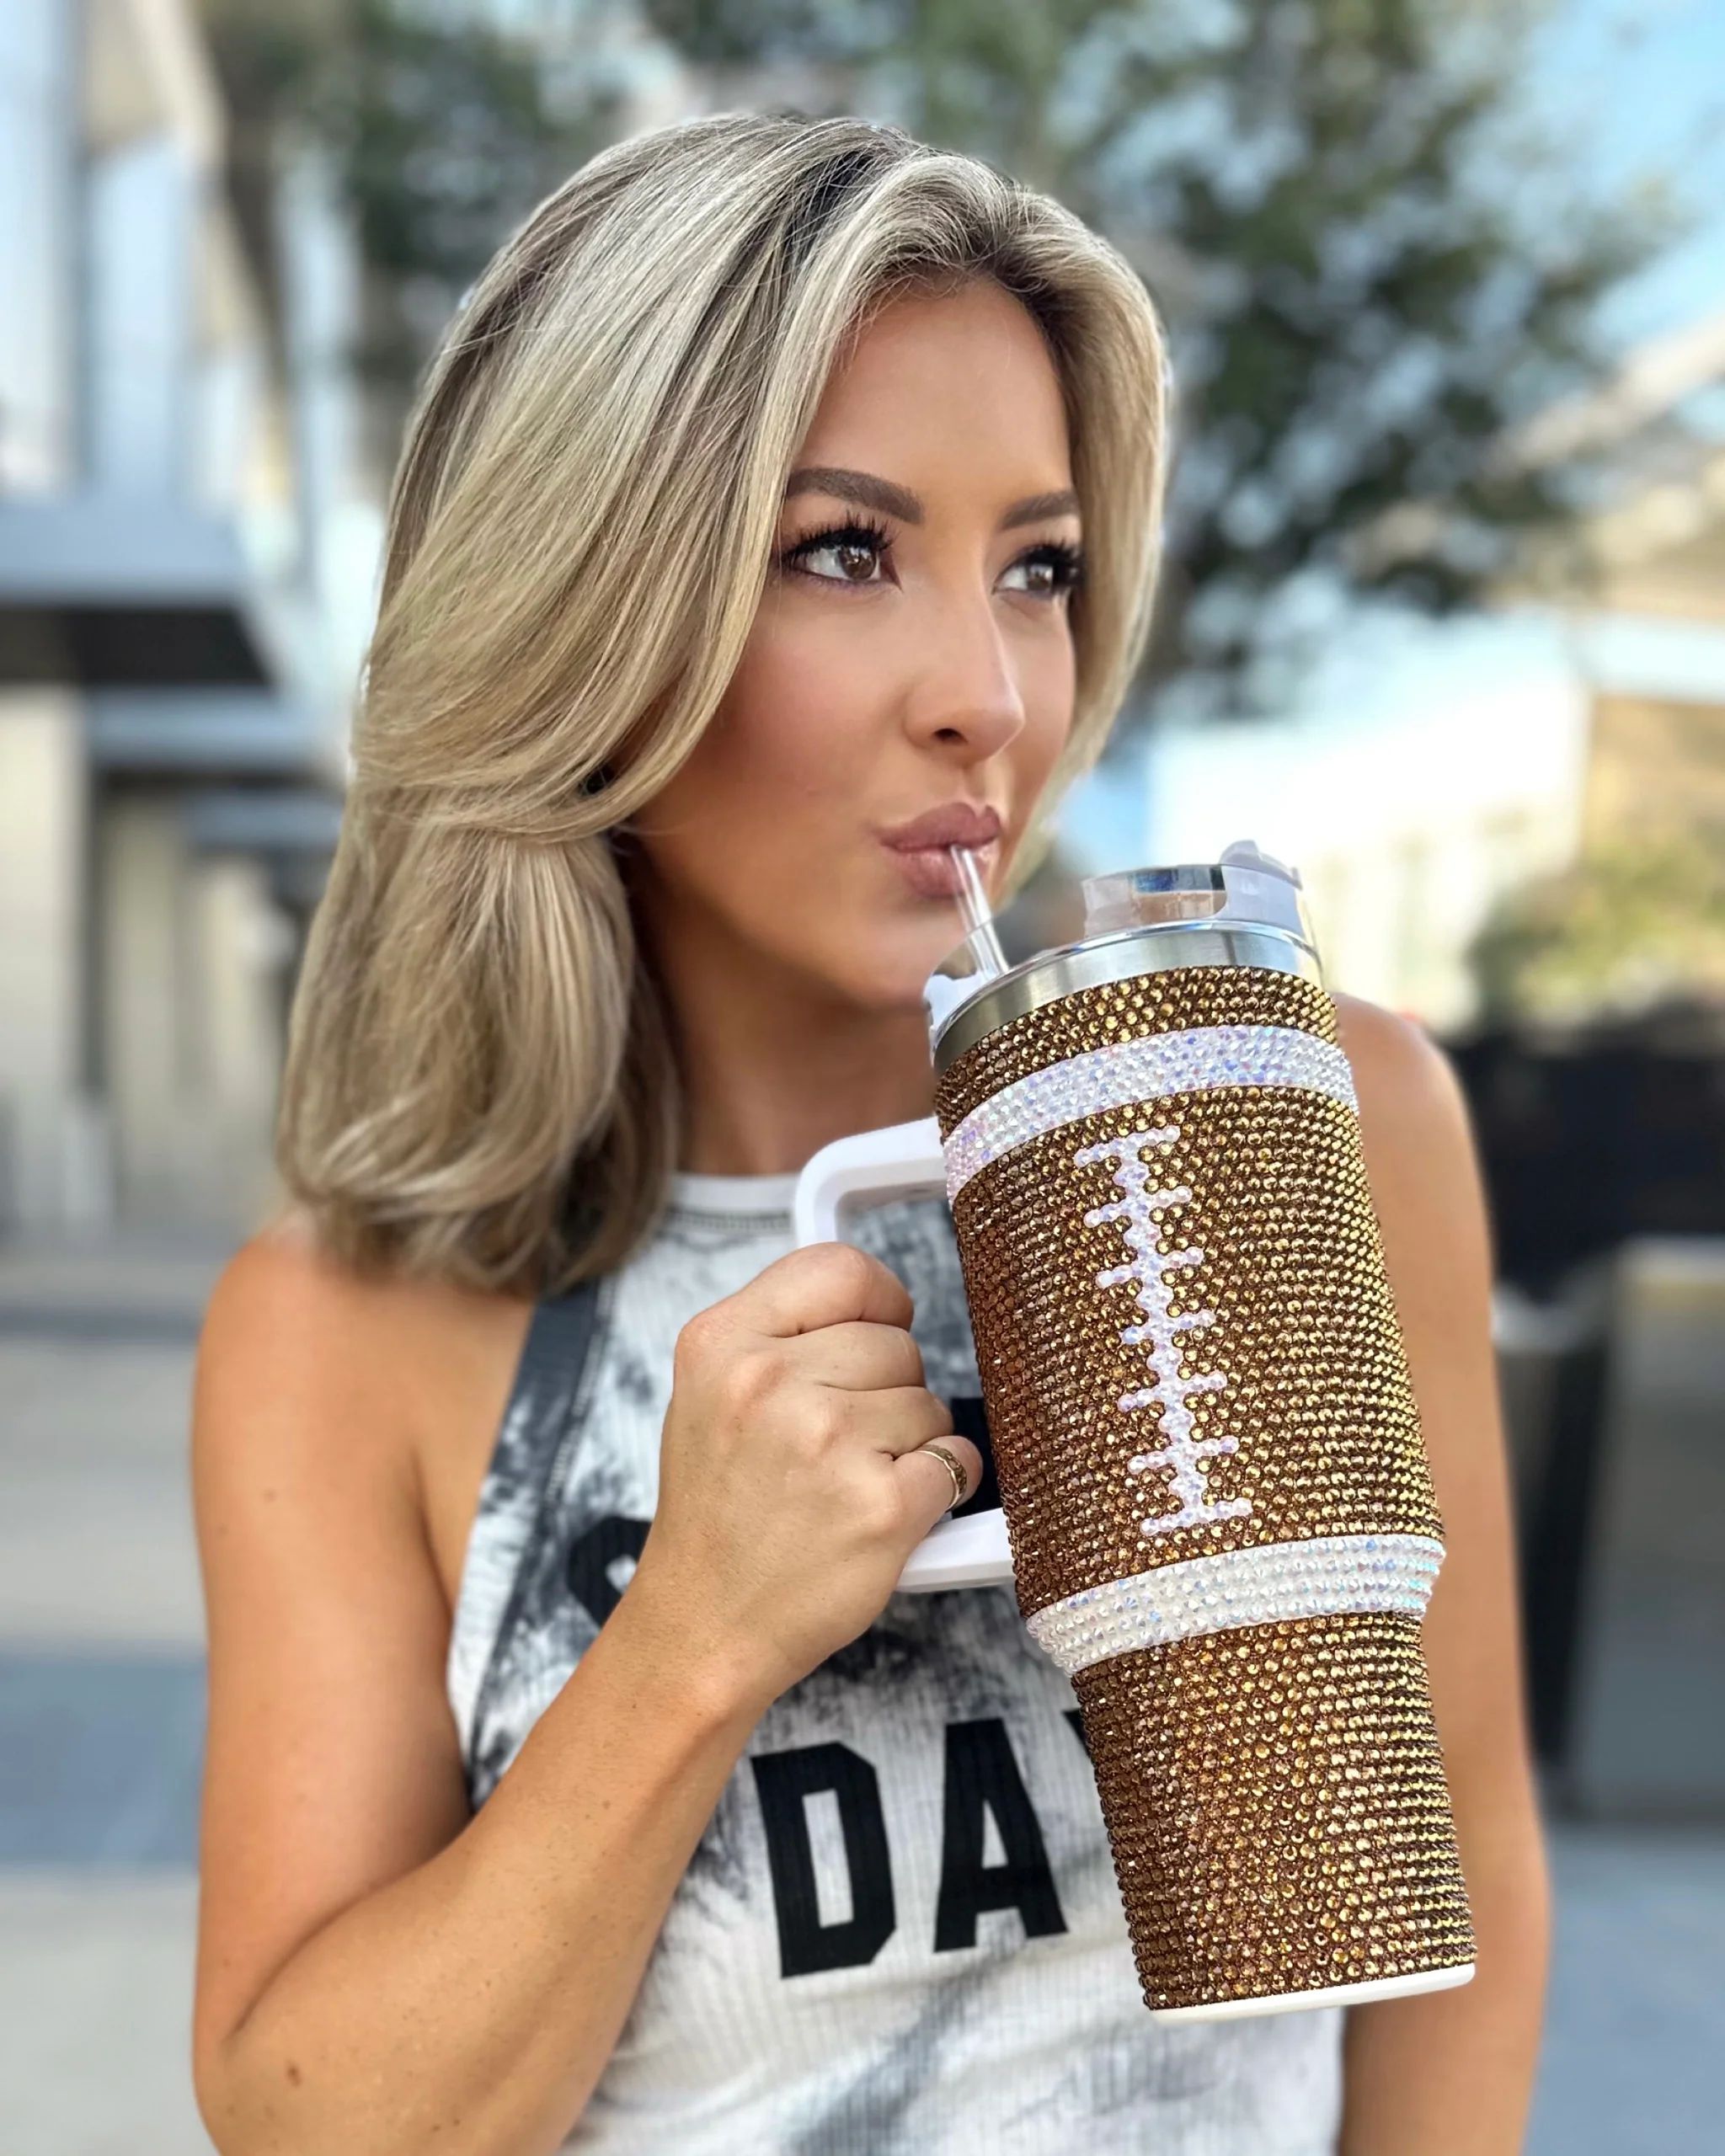 Crystal Football "Blinged Out" 40 Oz. Tumbler (Pre-Order Ships 9/1) | Live Love Gameday®